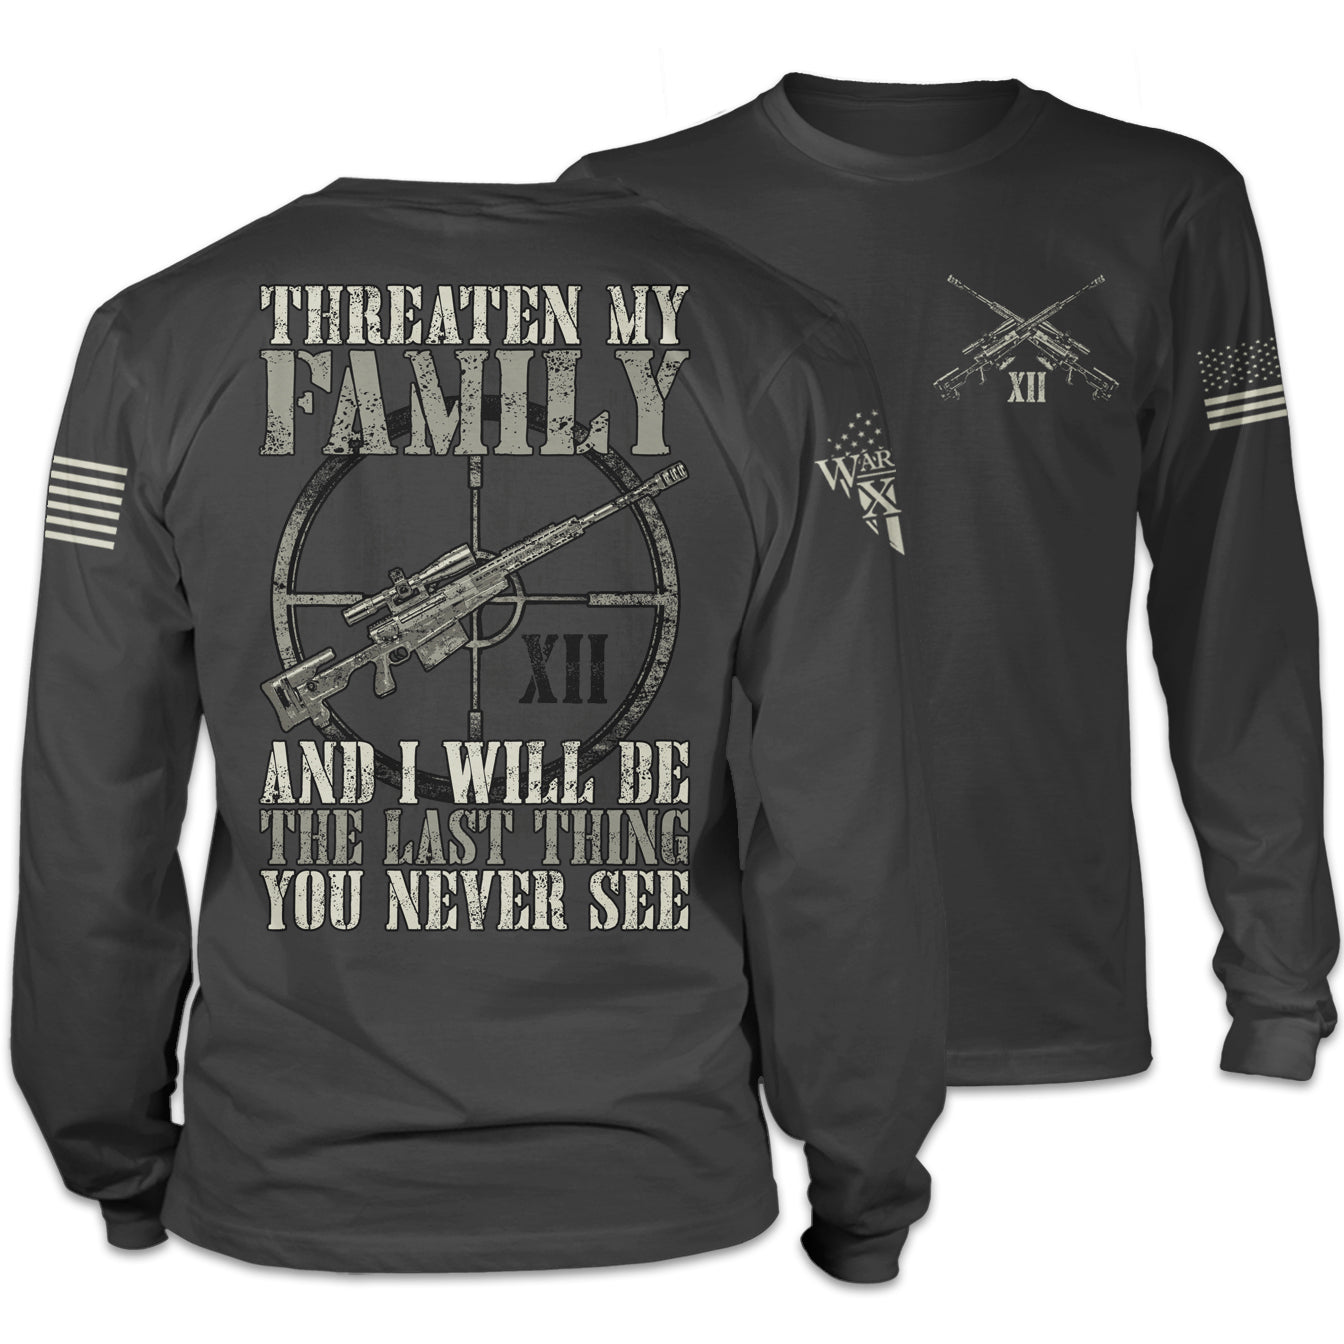 Front & back grey long sleeve shirt with the words "Threaten My Family and I'll Be The Last Thing You Never See" and a gun printed on the shirt.